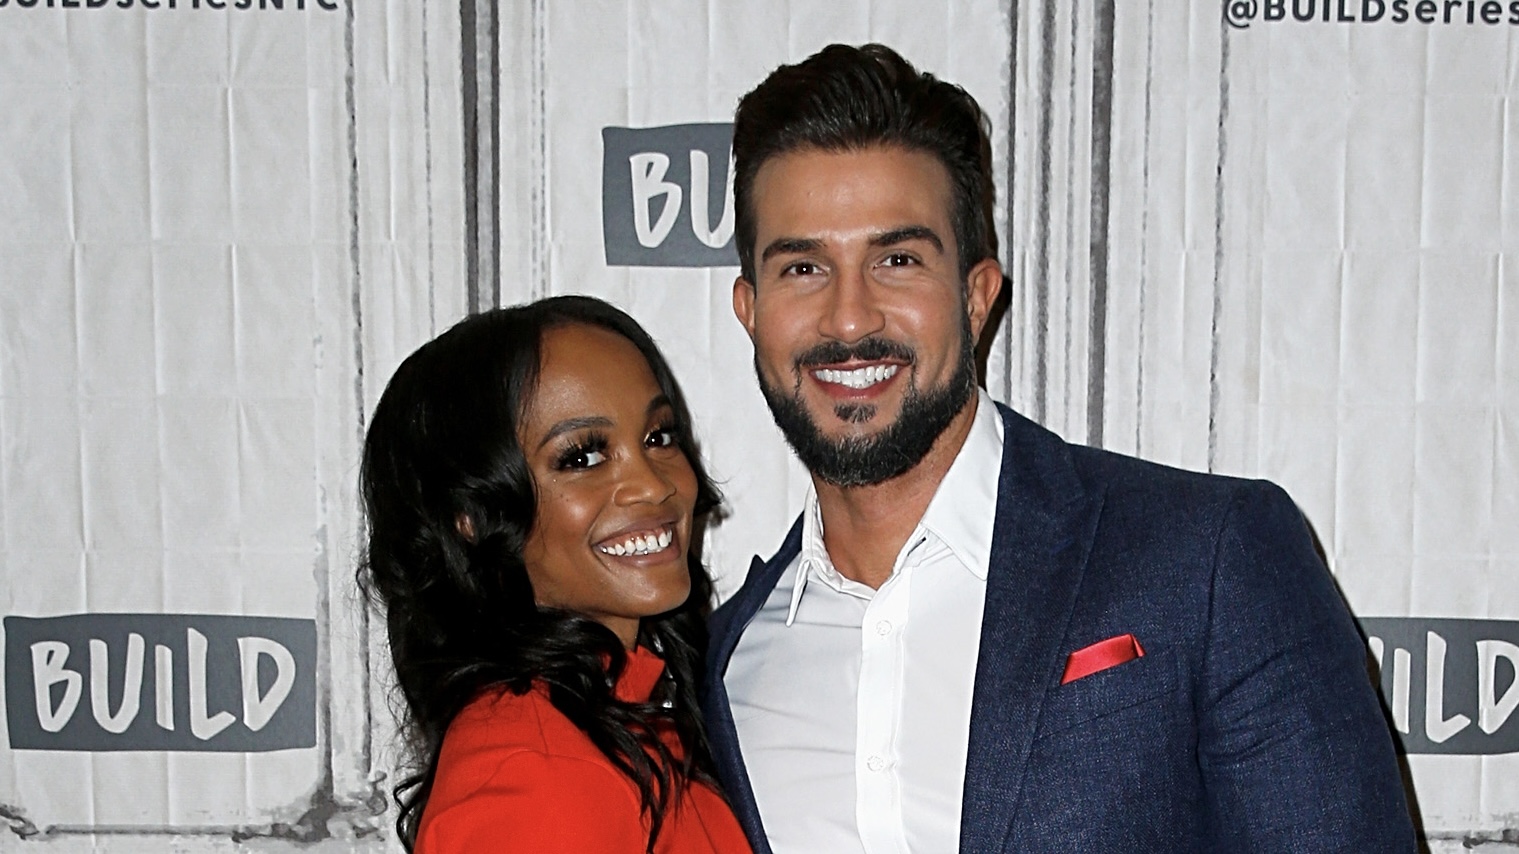 NEW YORK, NEW YORK - SEPTEMBER 30: Rachel Lindsay and Bryan Abasolo attend the Build Series to discuss 'The Bachelorette' at Build Studio on September 30, 2019 in New York City.